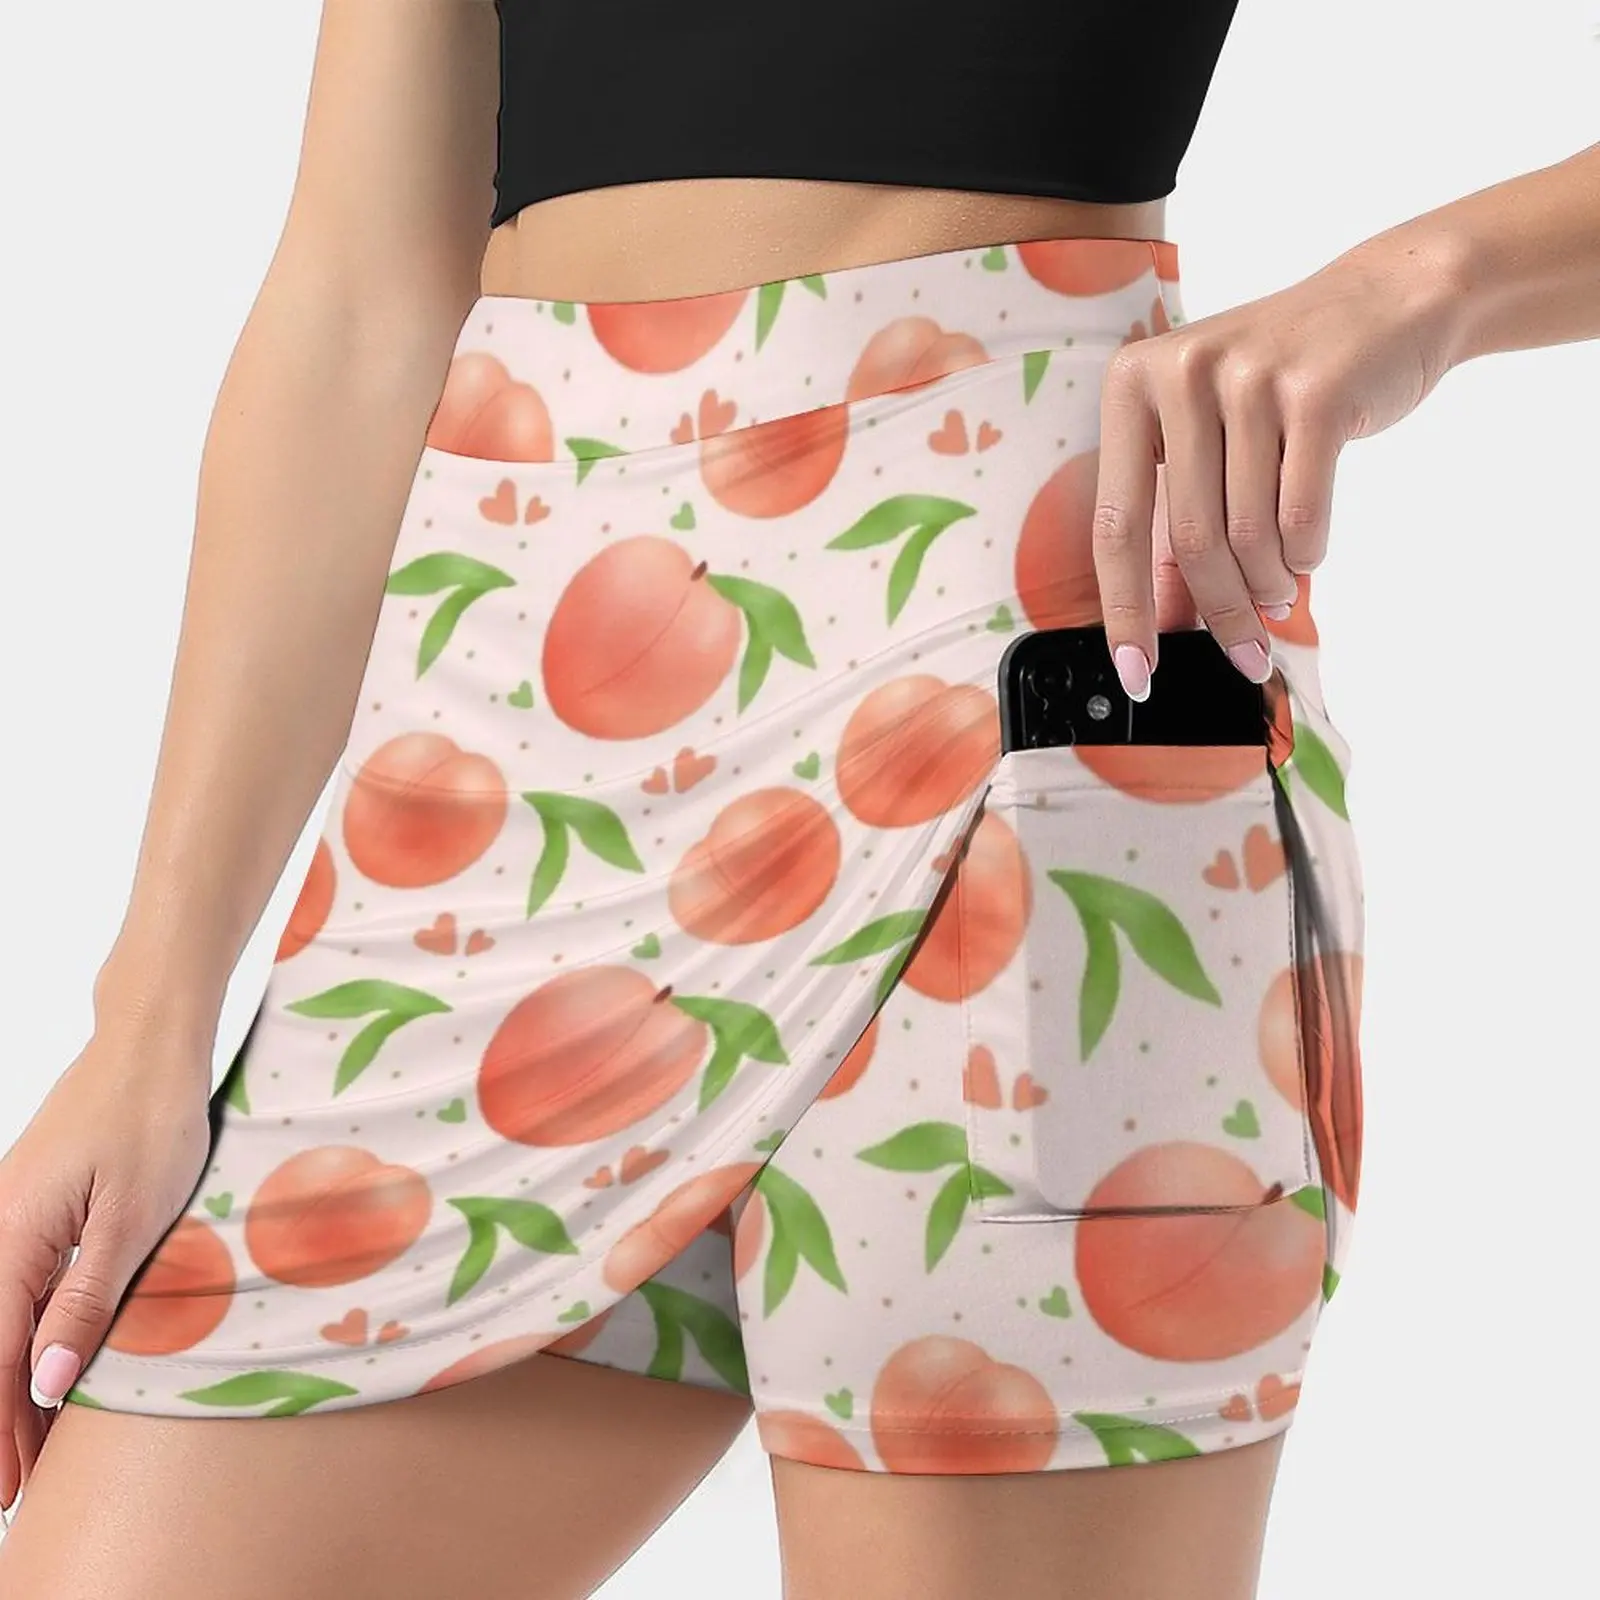 

Peaches Women's skirt With Pocket Vintage Skirt Printing A Line Skirts Summer Clothes Peach Peaches Pattern Orange Nature Fruit